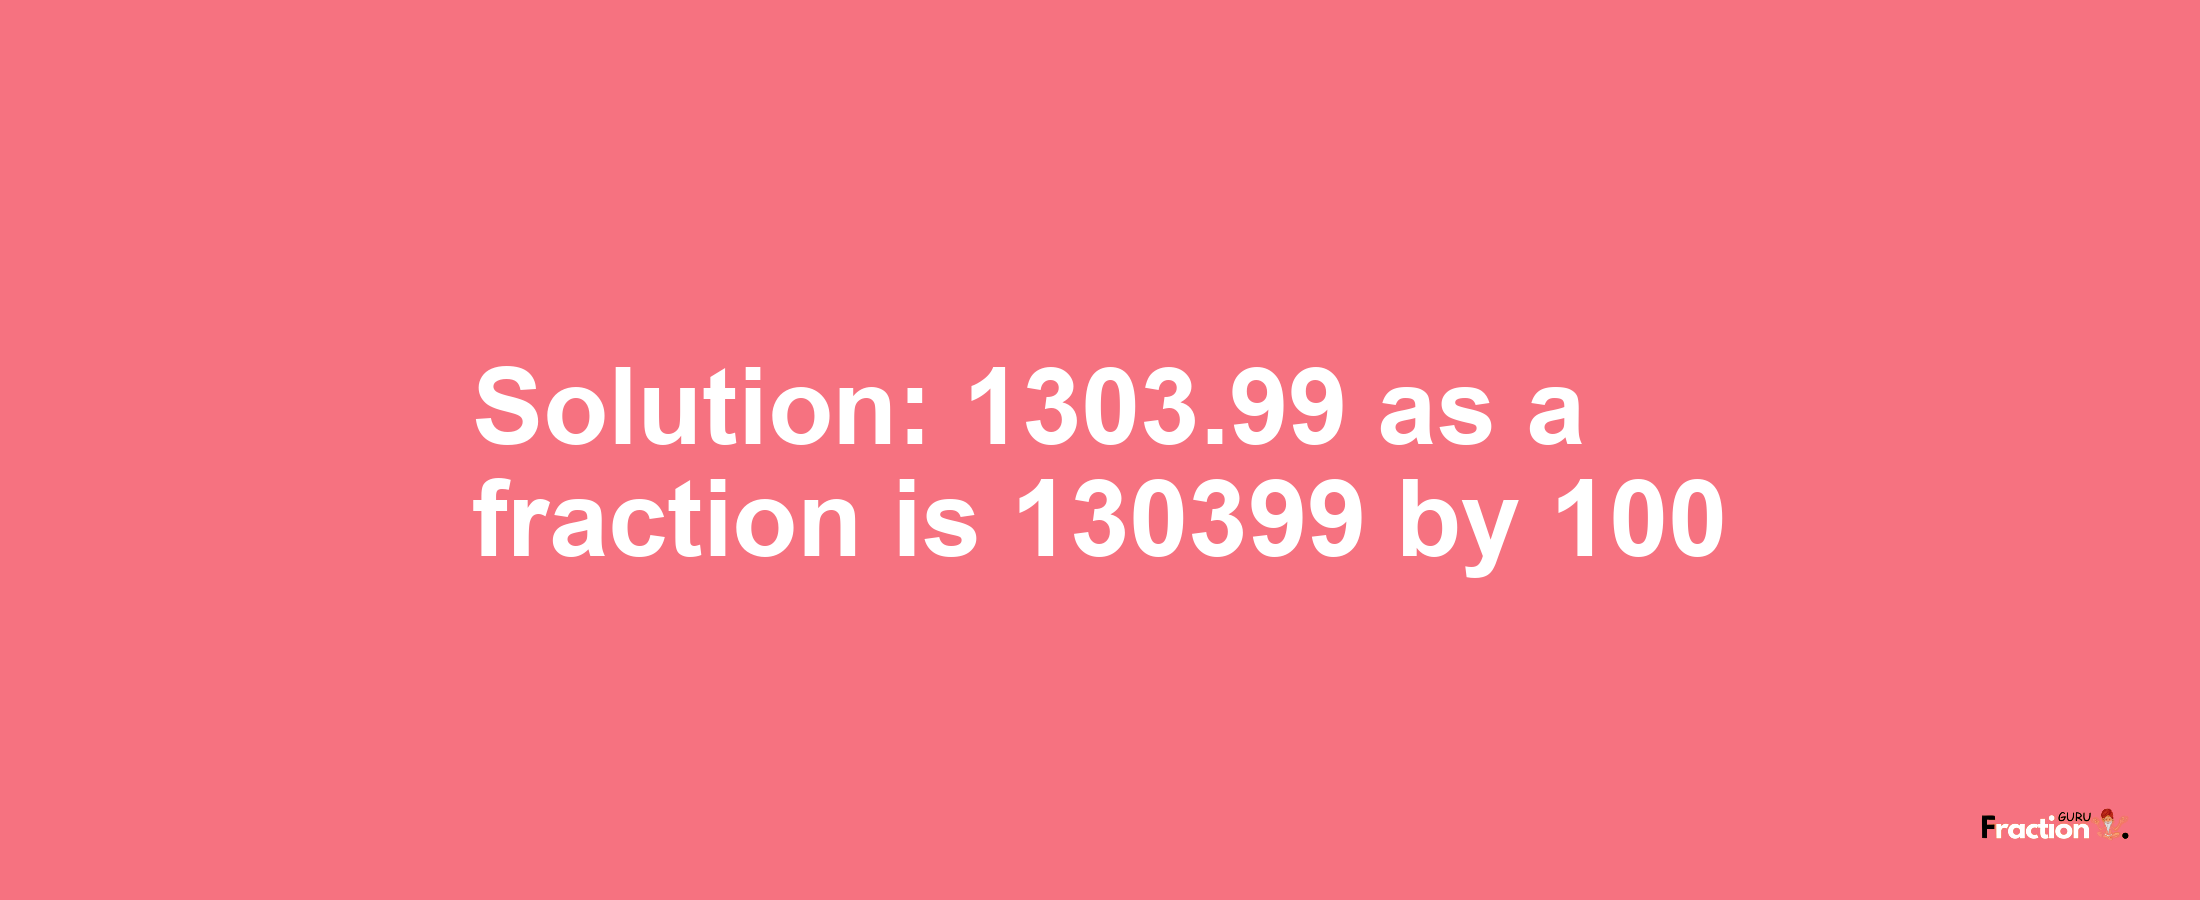 Solution:1303.99 as a fraction is 130399/100